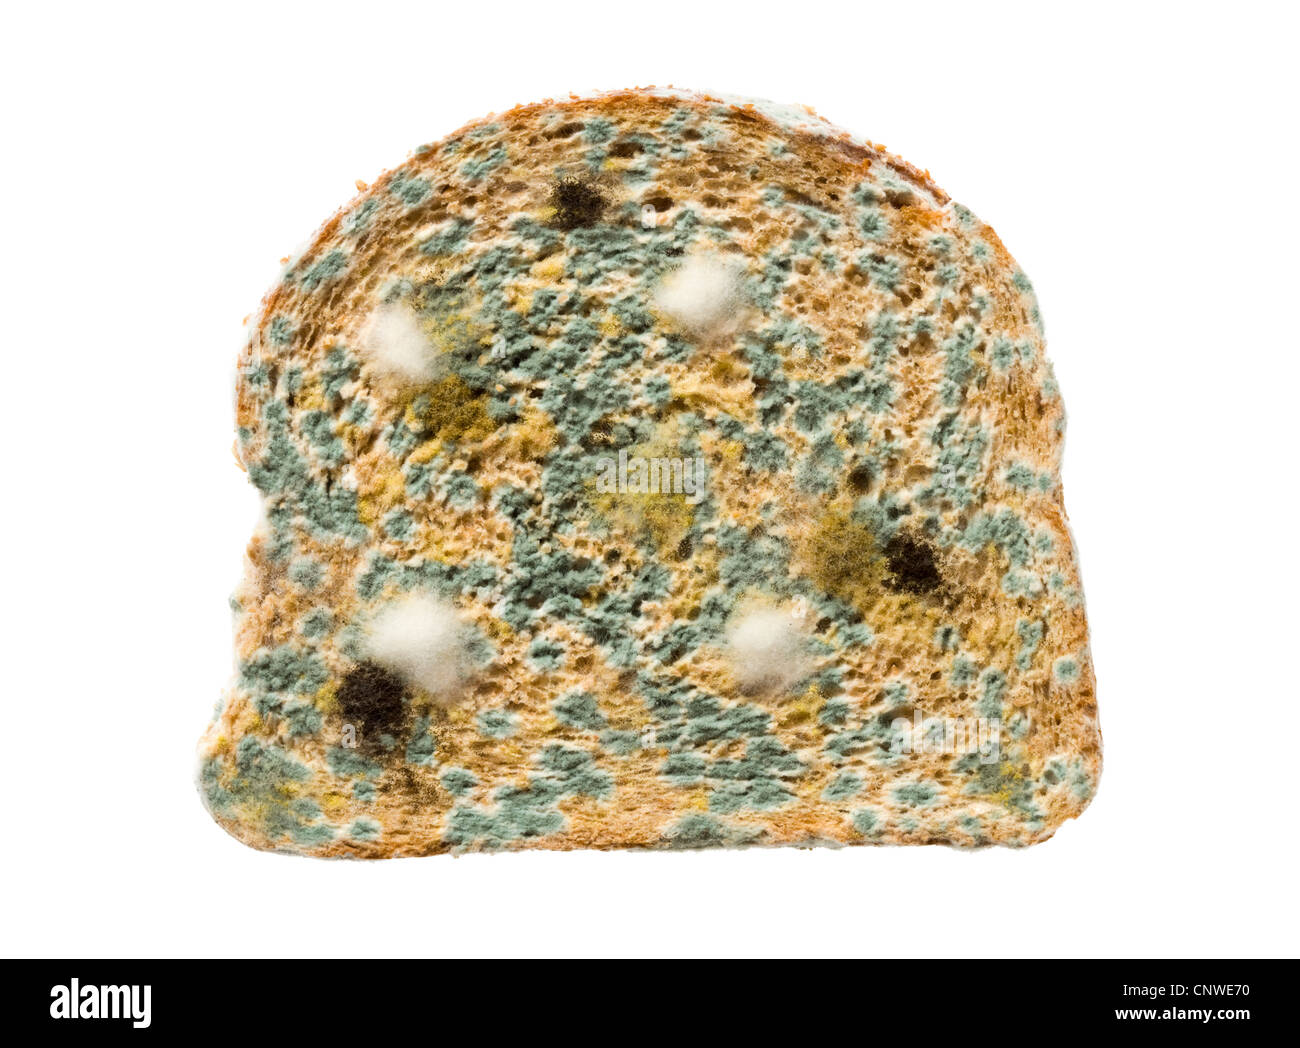 Mouldy slice of bread Stock Photo